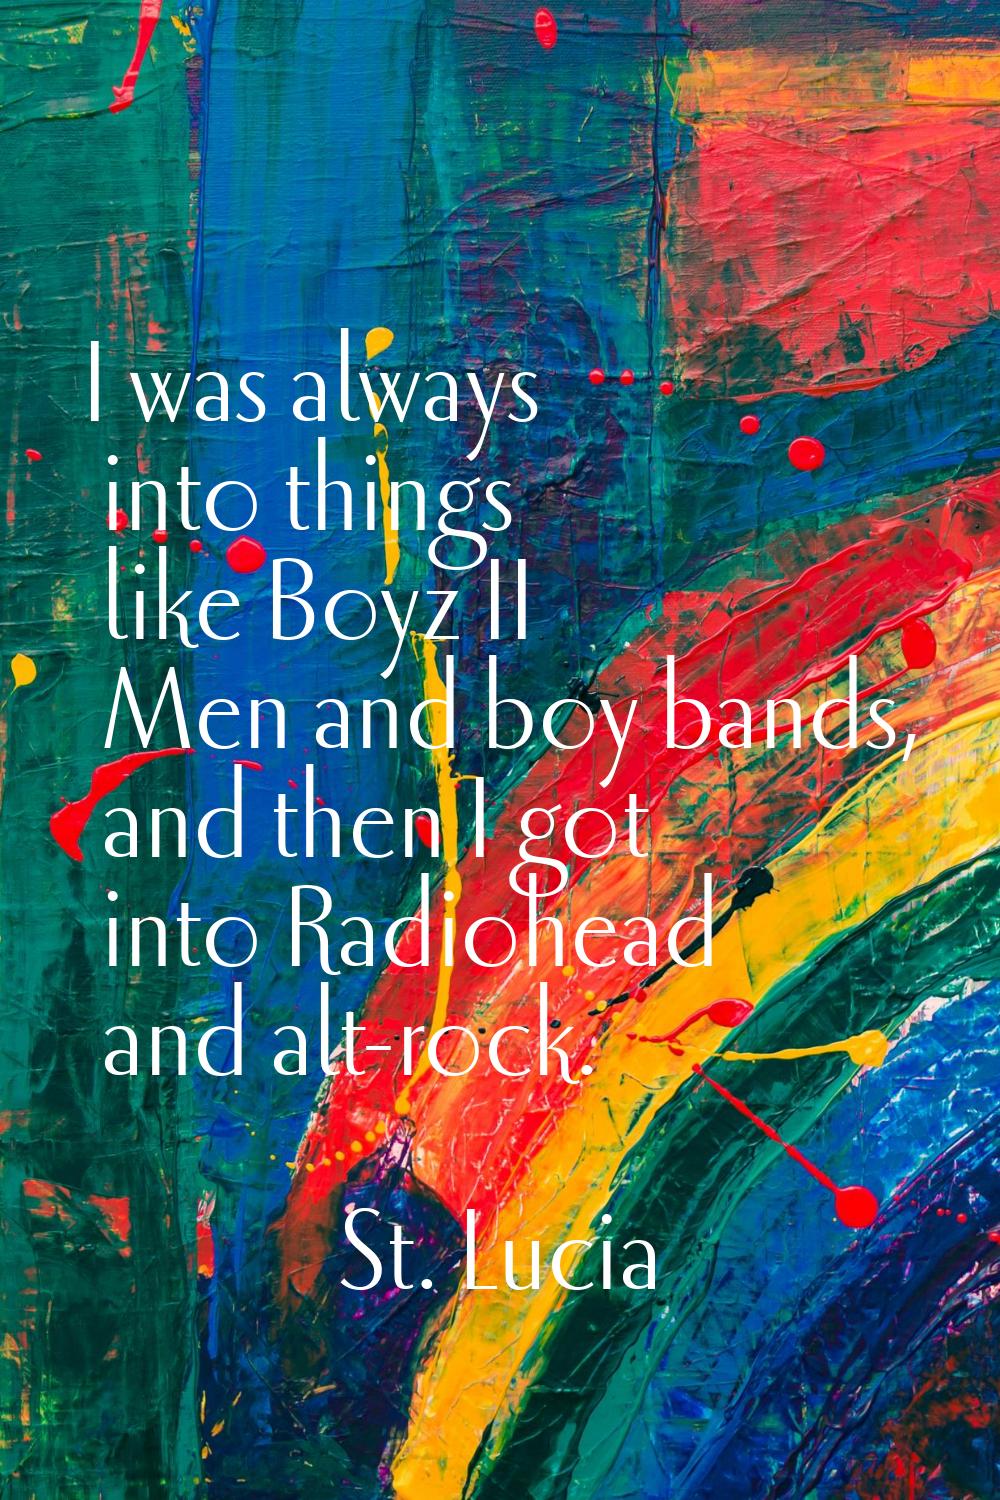 I was always into things like Boyz II Men and boy bands, and then I got into Radiohead and alt-rock